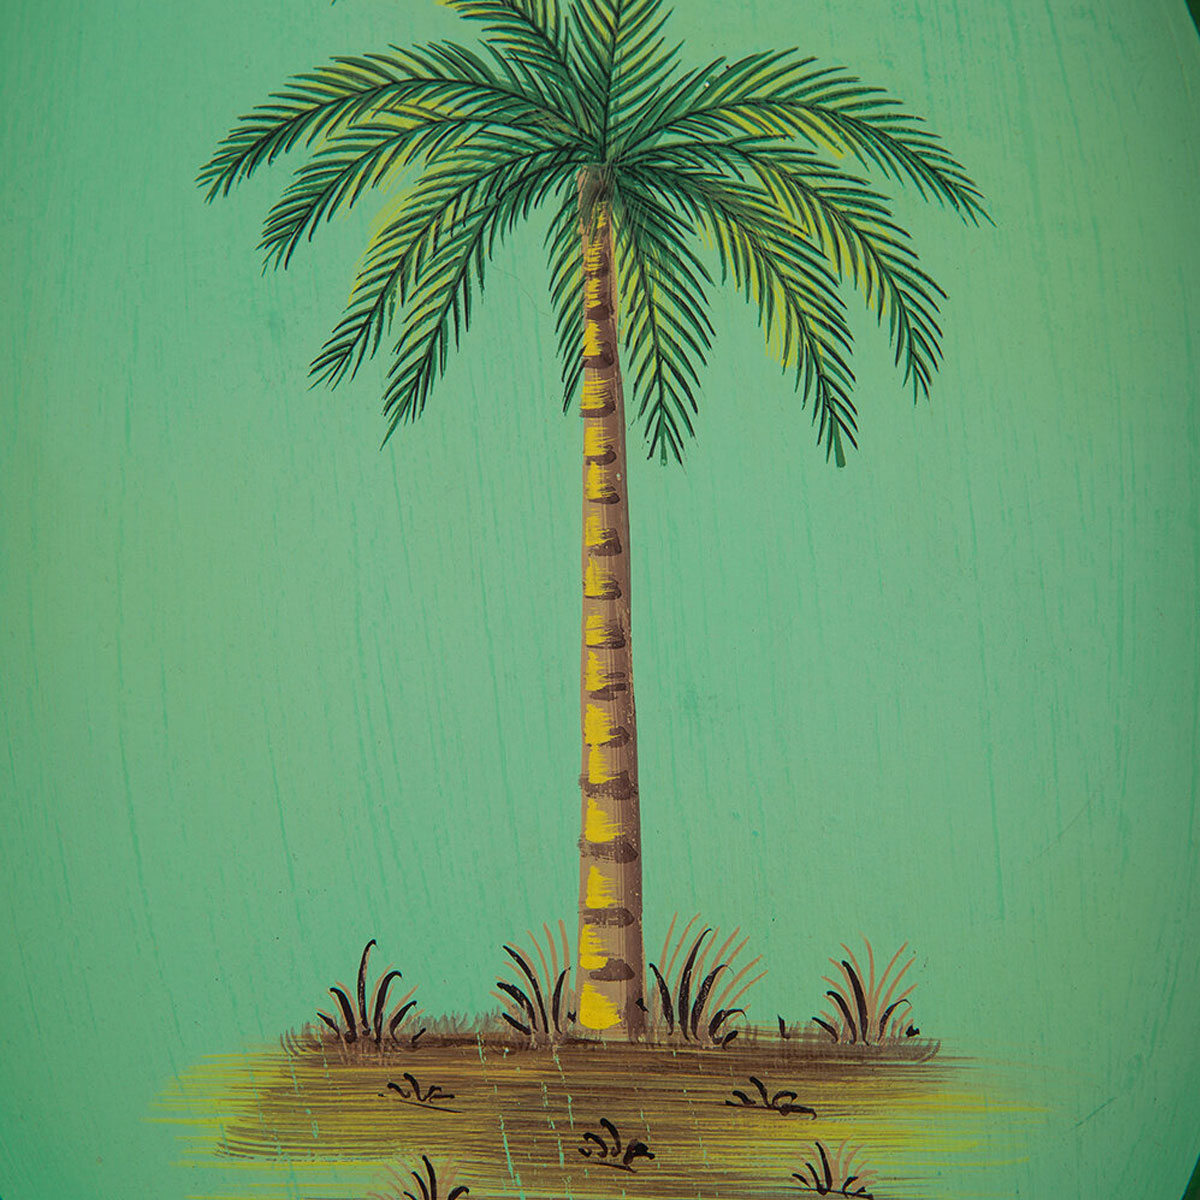 Fauna Hand painted Iron Tray Palm Tree - Les-Ottomans